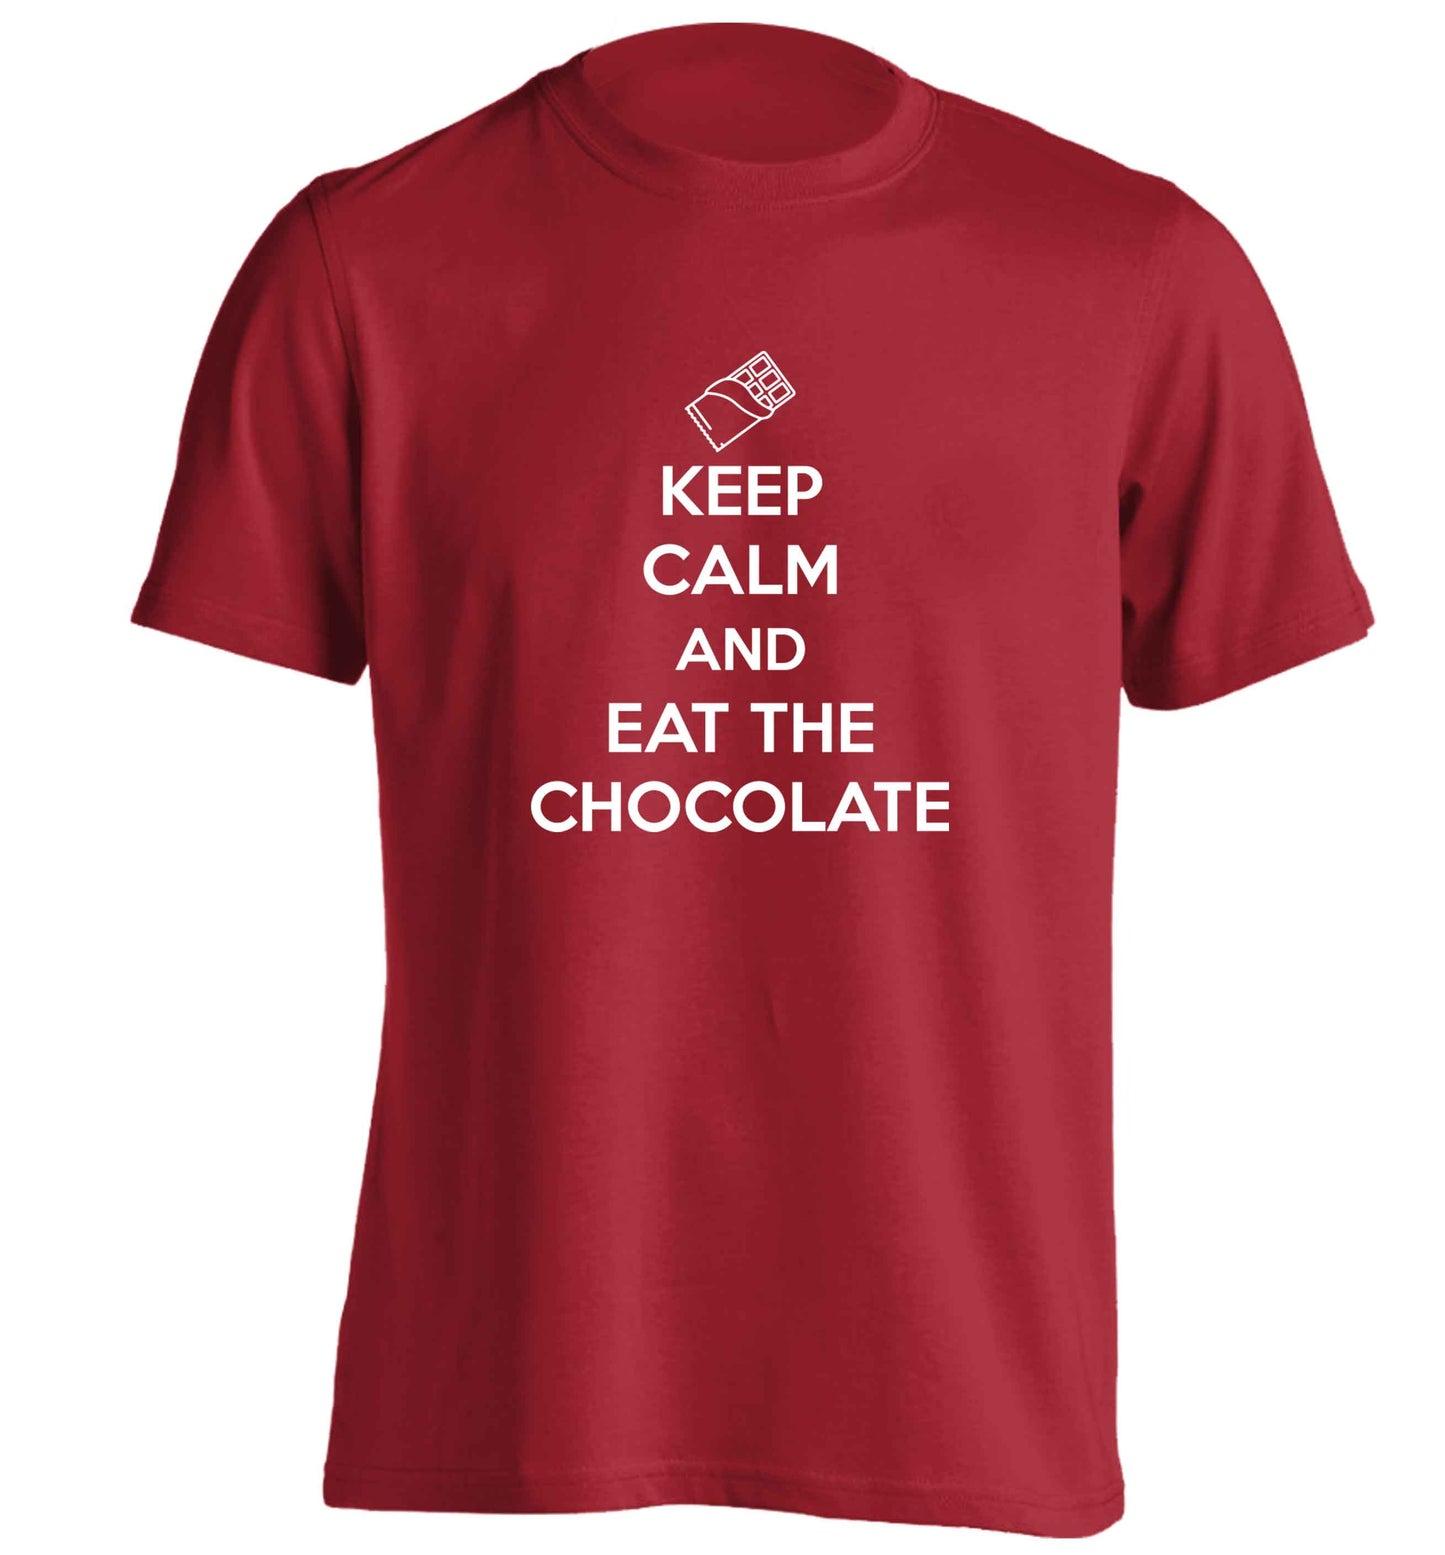 funny gift for a chocaholic! Keep calm and eat the chocolate adults unisex red Tshirt 2XL